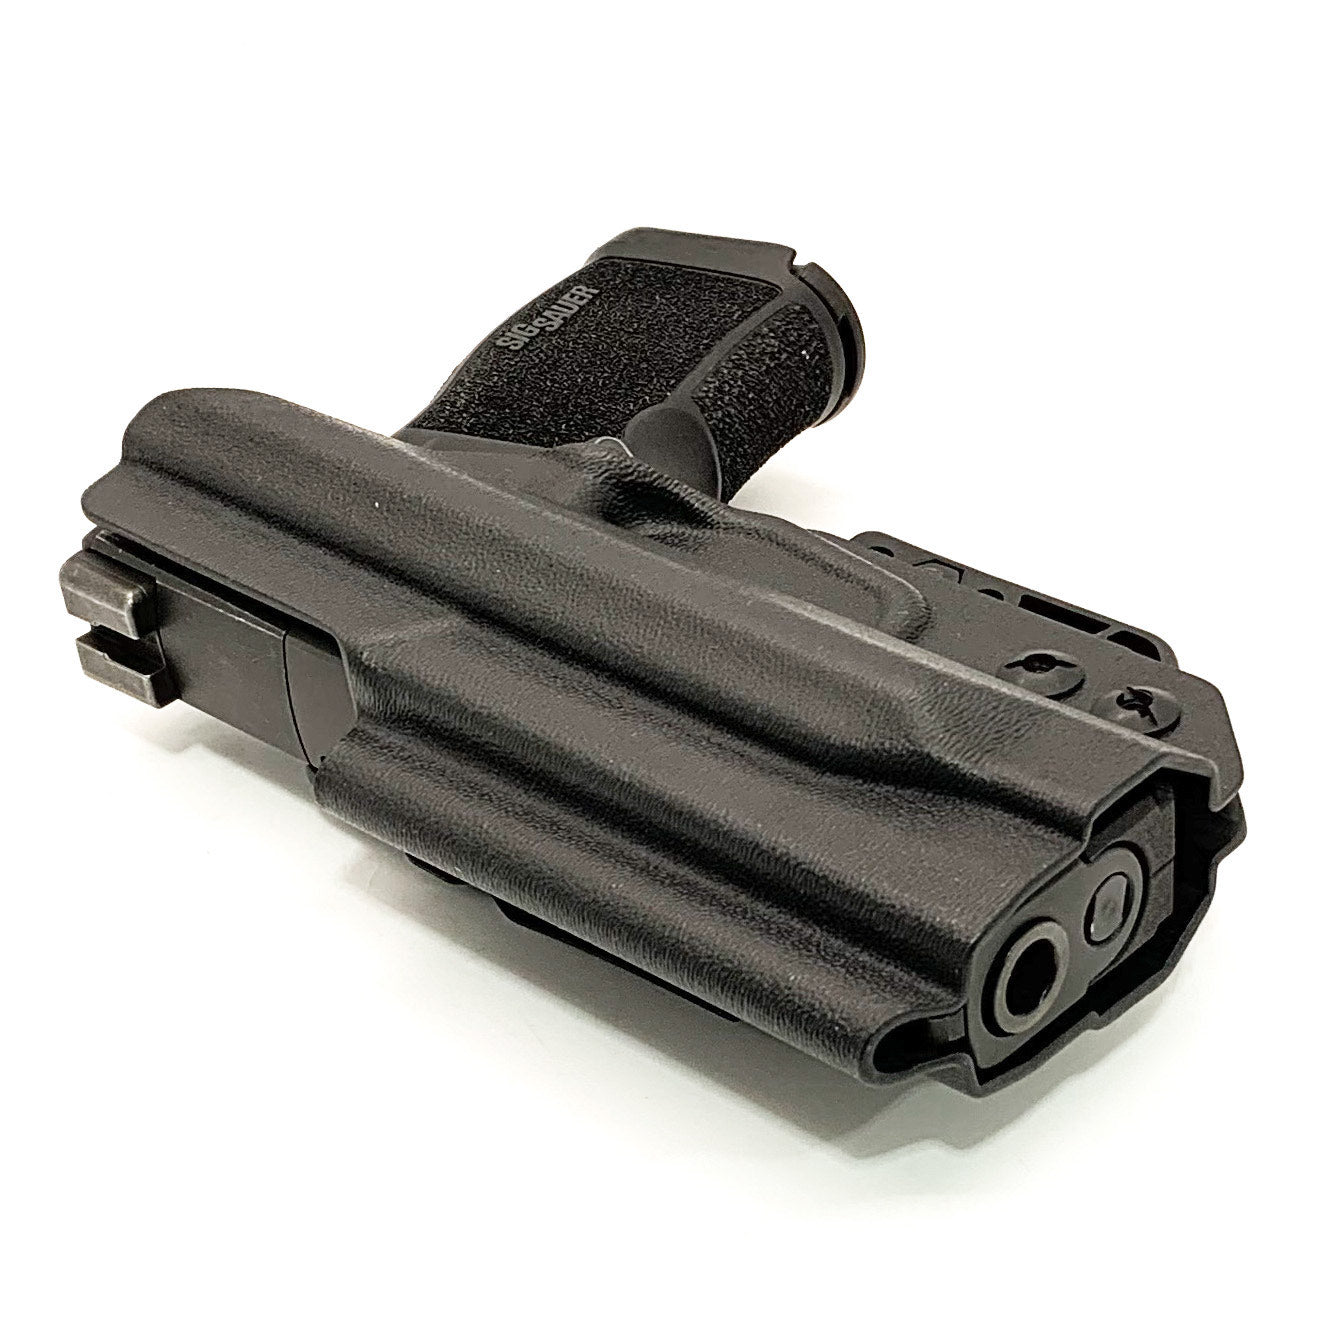 Inside waistband holster designed to fit the Sig Sauer P365 and P365XL pistol series with the Tactical Development Pro Ledge Tactical Application Rail installed.  This holster will fit the Sig P365, P365X, P365XL Spectre, P365 XL RomeoZero, P365X RomeoZero, P365 SAS and P365XL Spectre Comp with the Pro Ledge Rail.